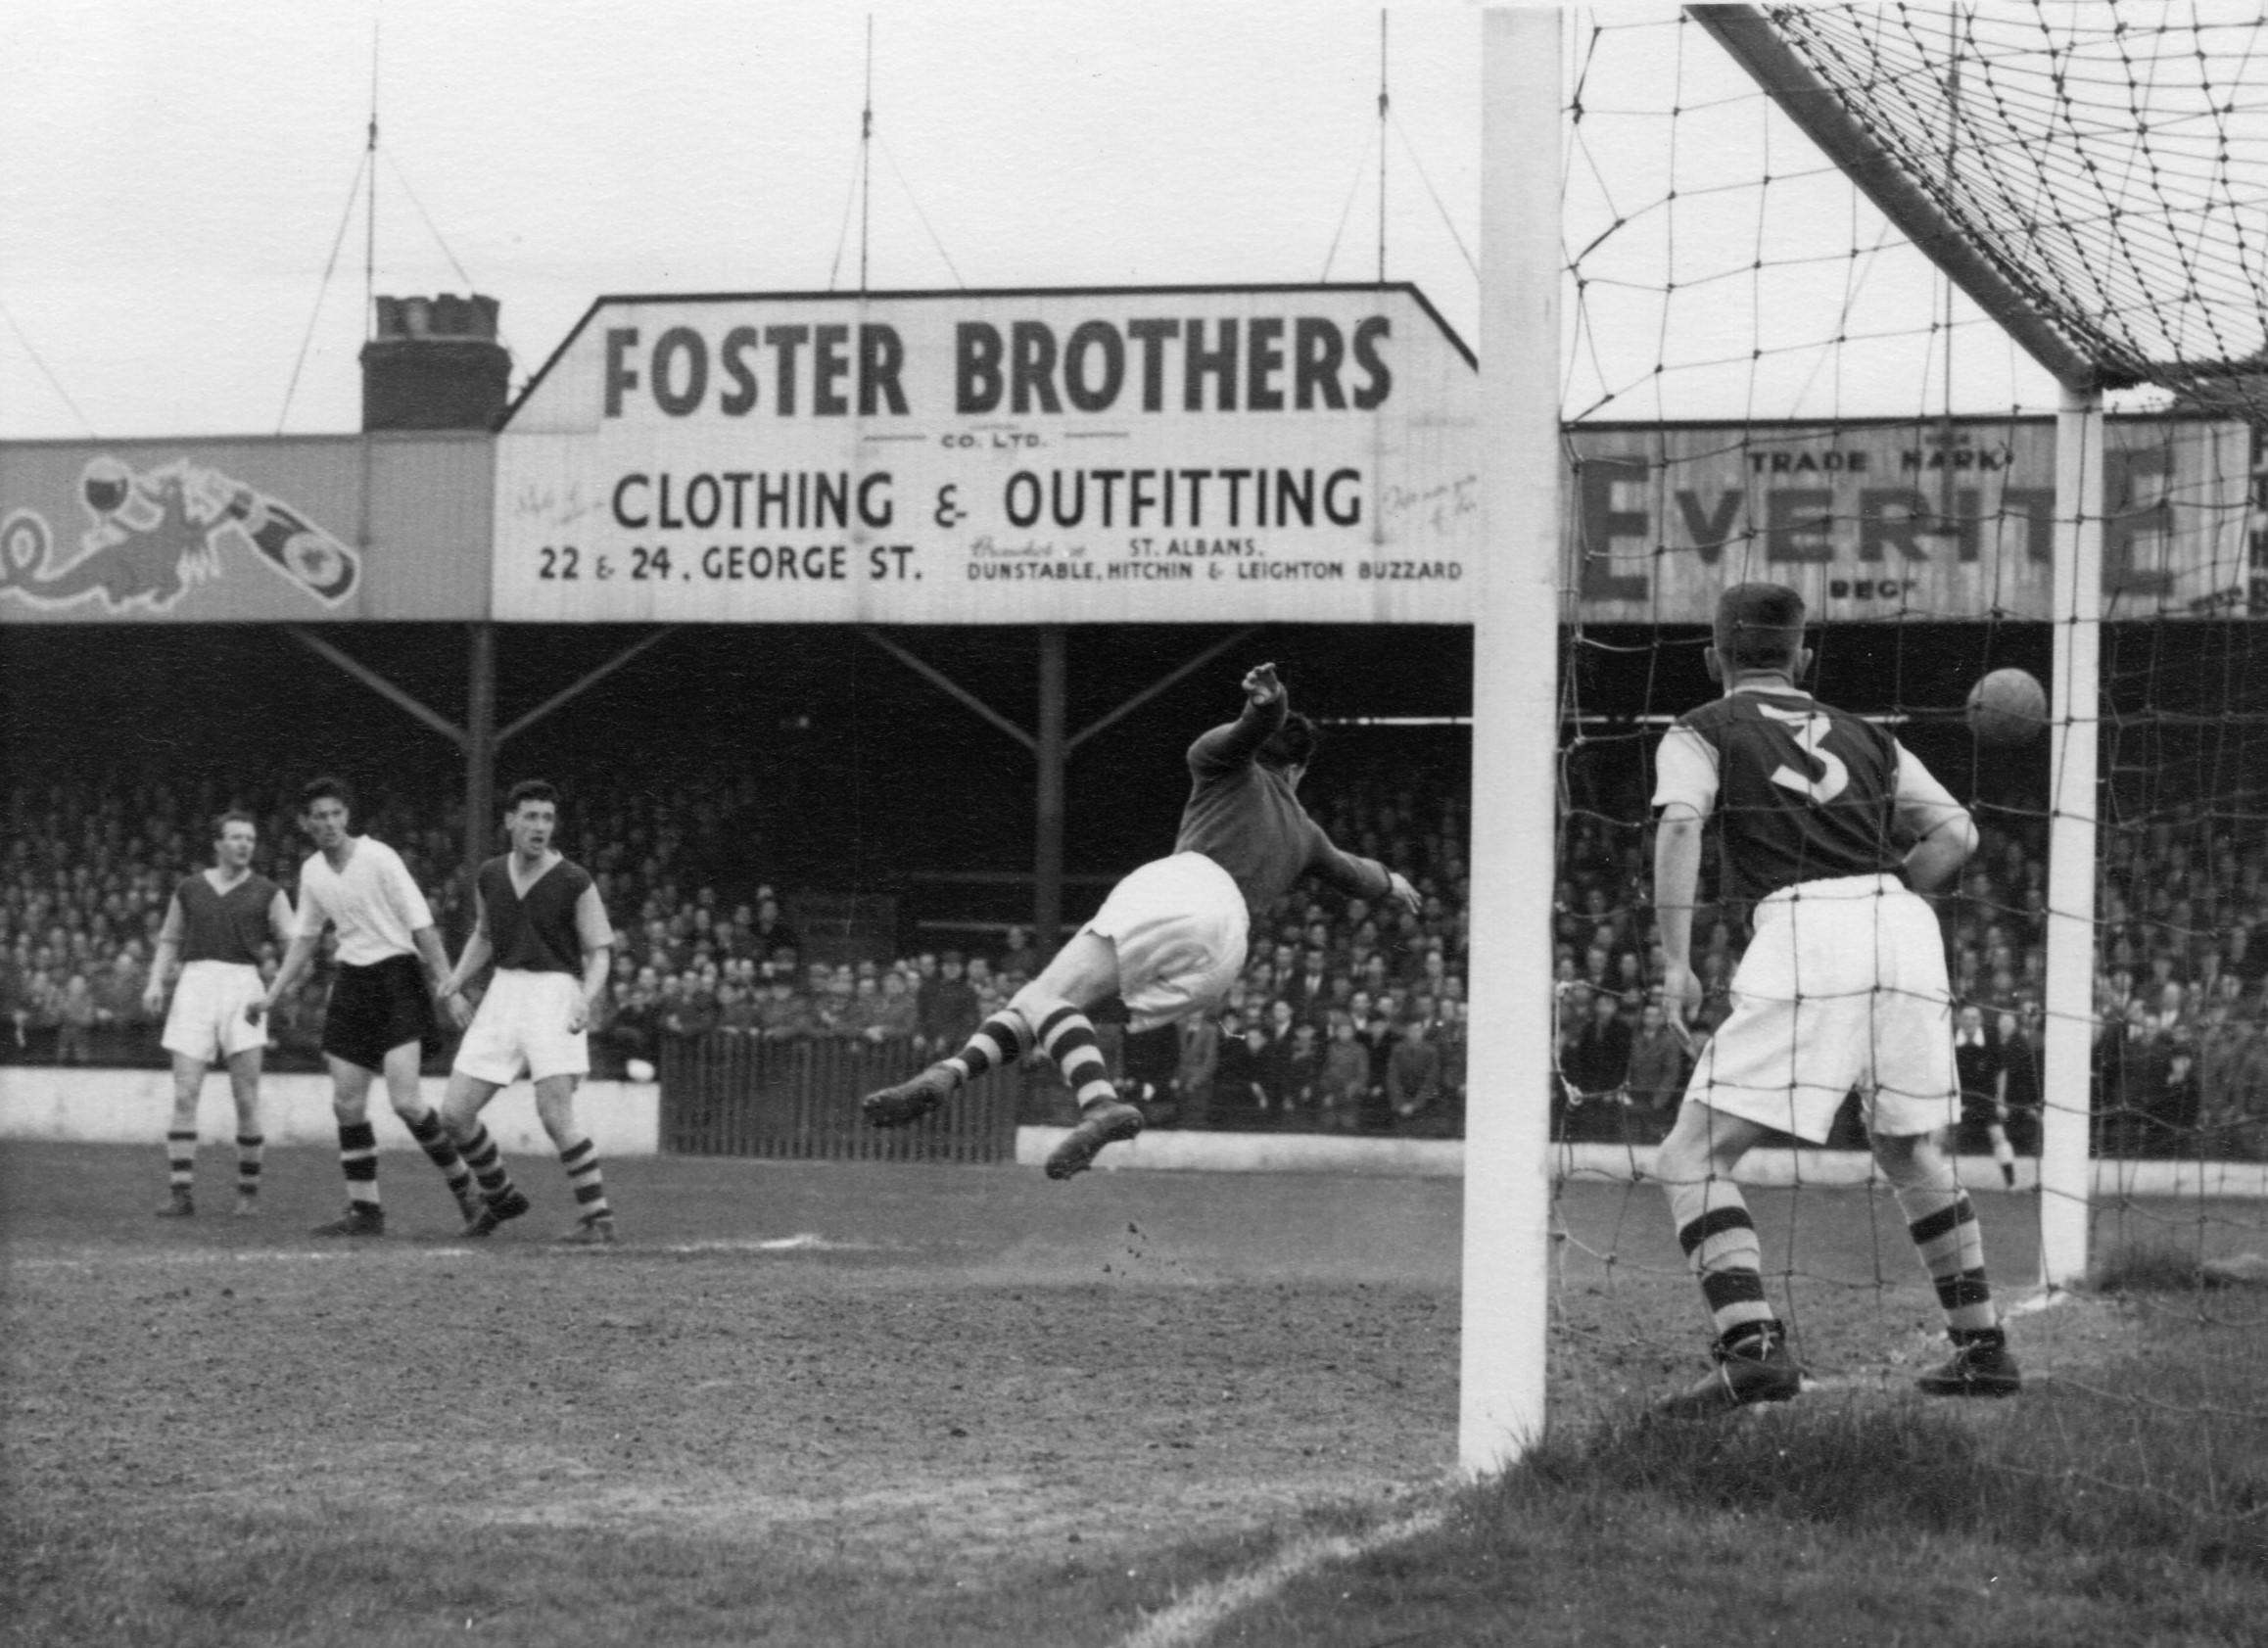 John Groves looks on as Burnley keeper Colin McDonald tips a shot on goal around the post